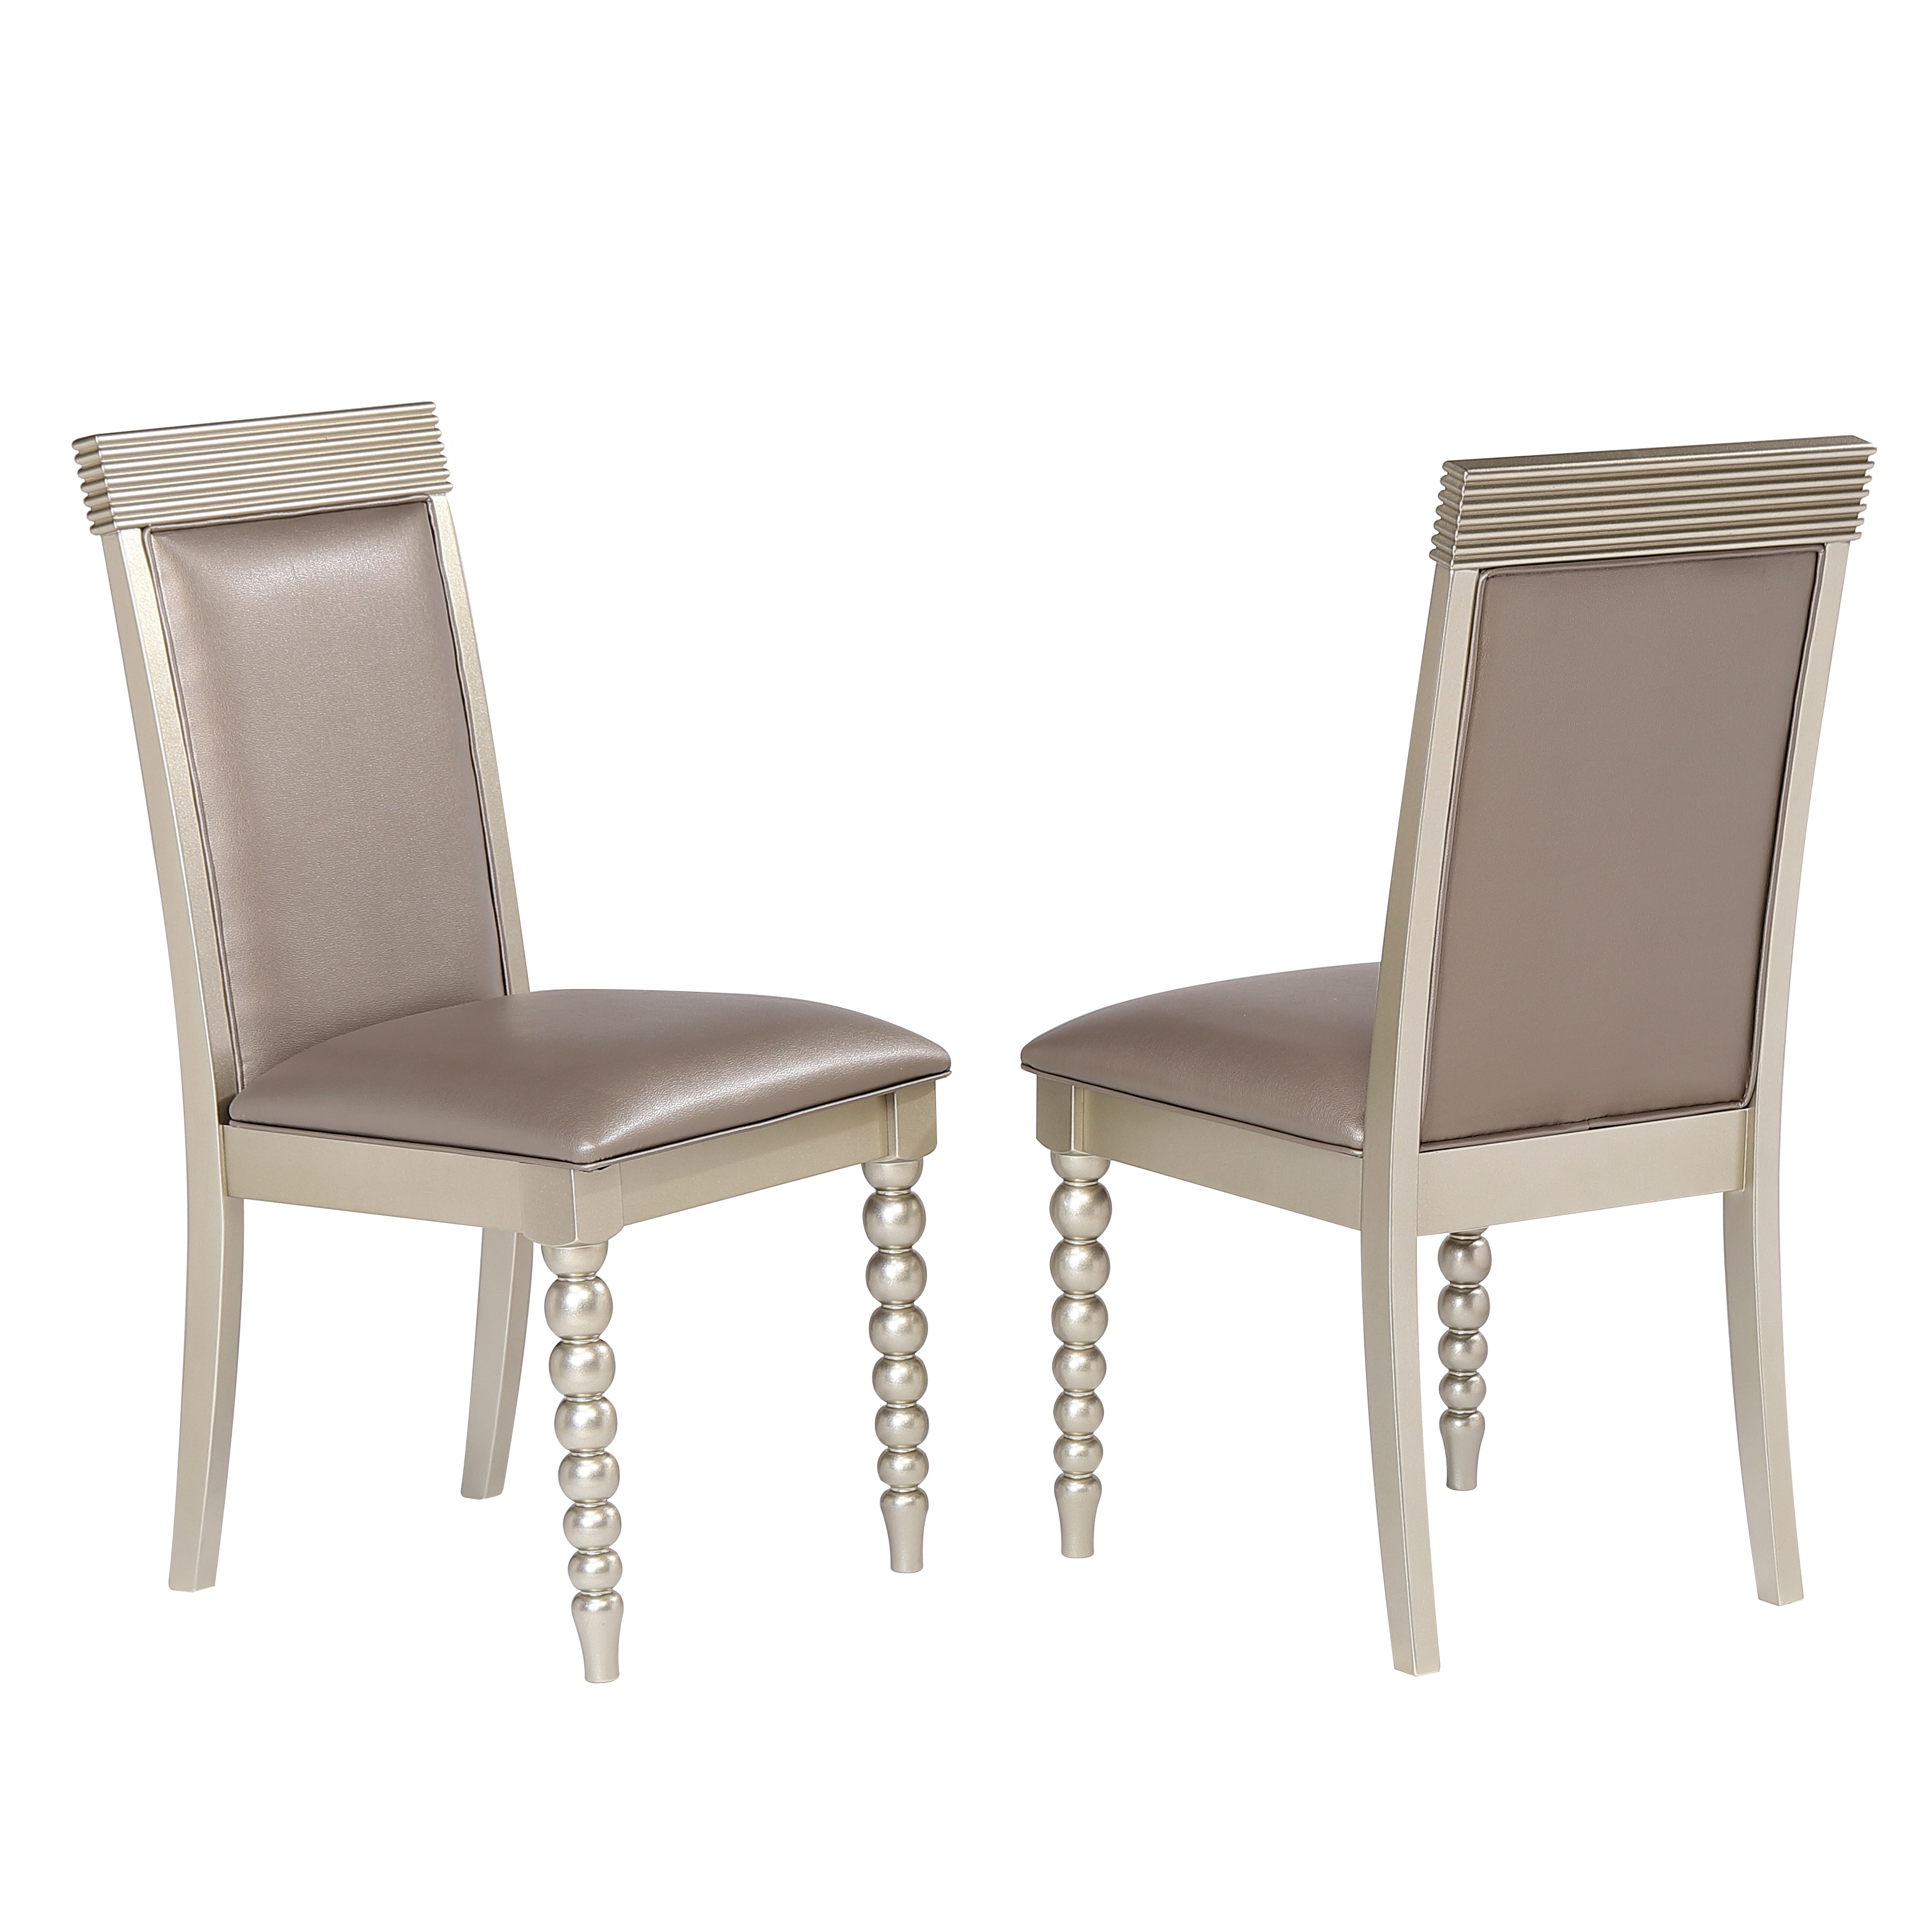 Seraph Dining Chairs - Set of 2